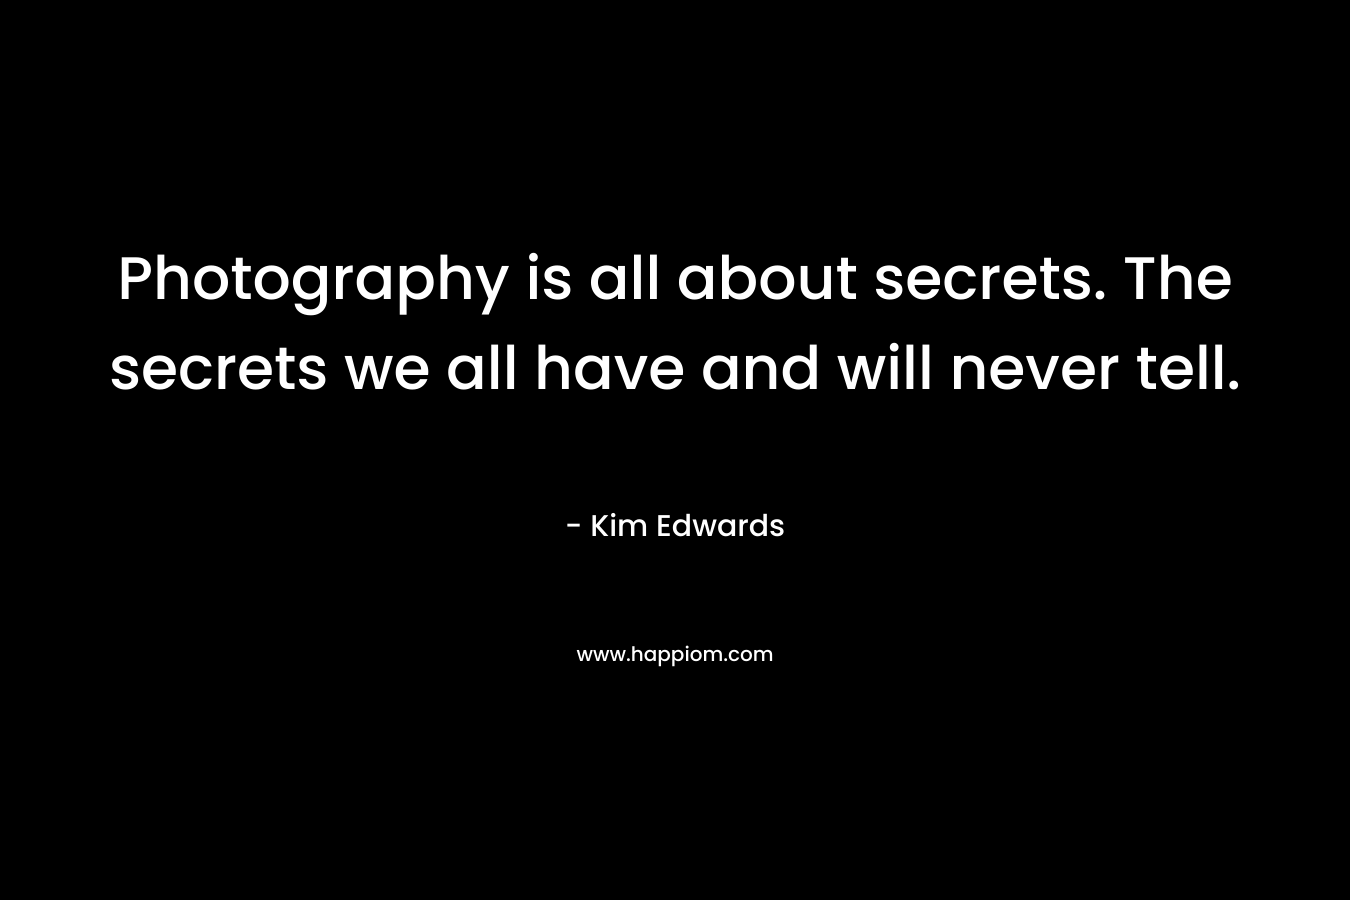 Photography is all about secrets. The secrets we all have and will never tell.